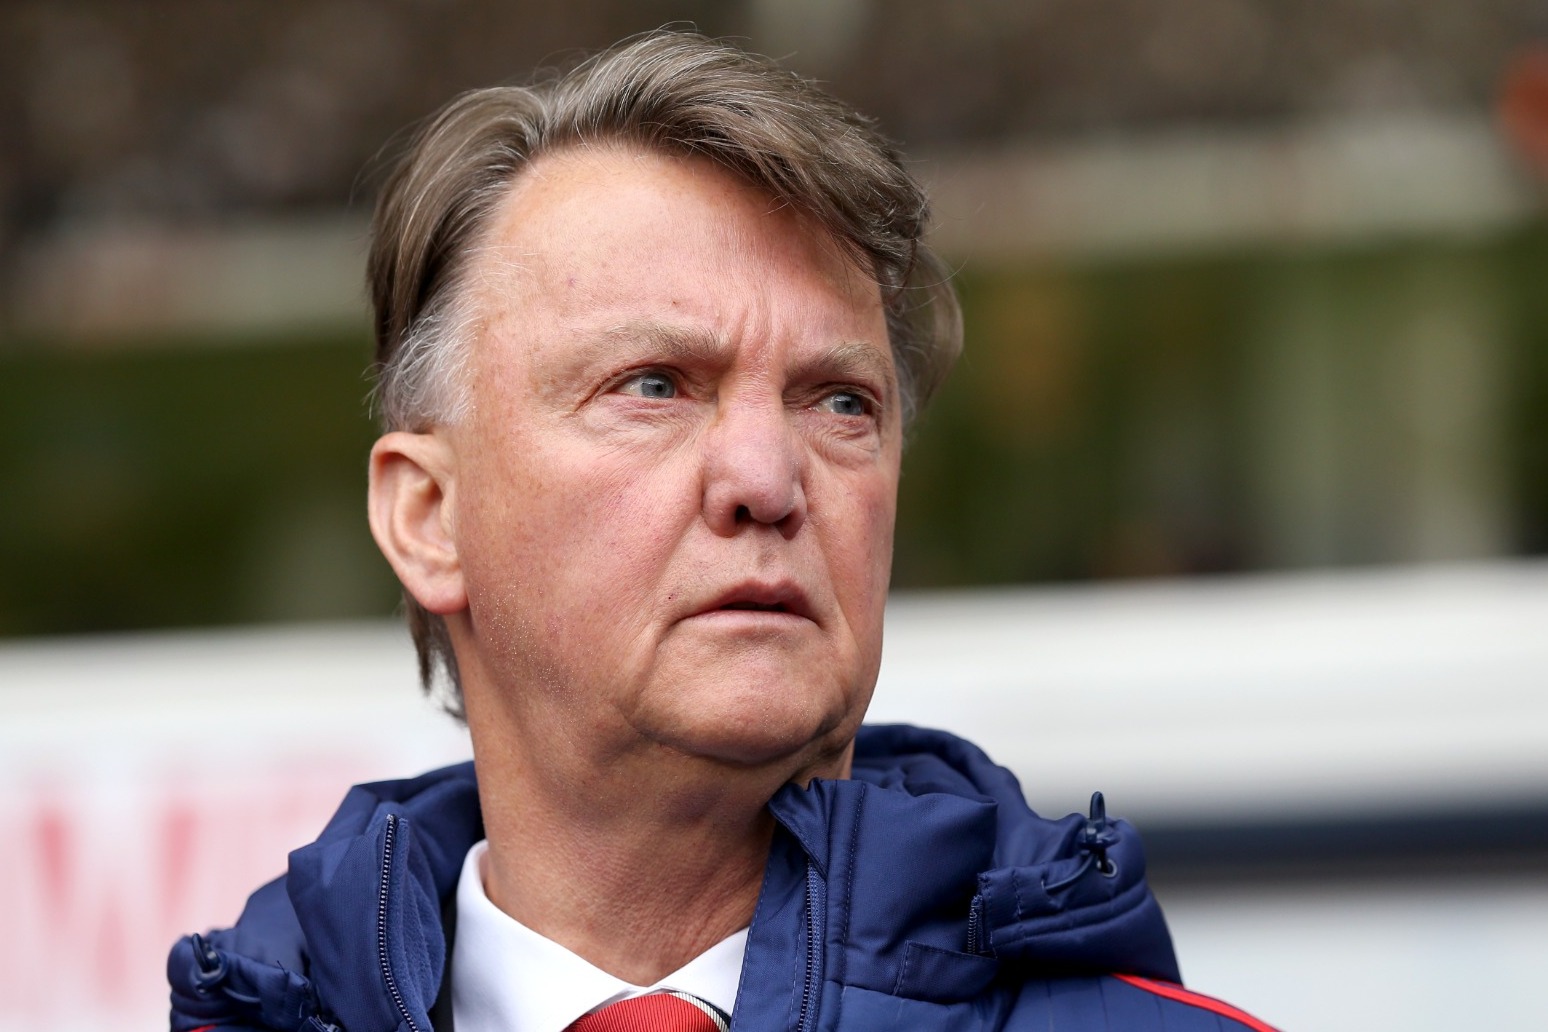 Louis Van Gaal suggests Ed Woodwards departure from Man Utd could spell success